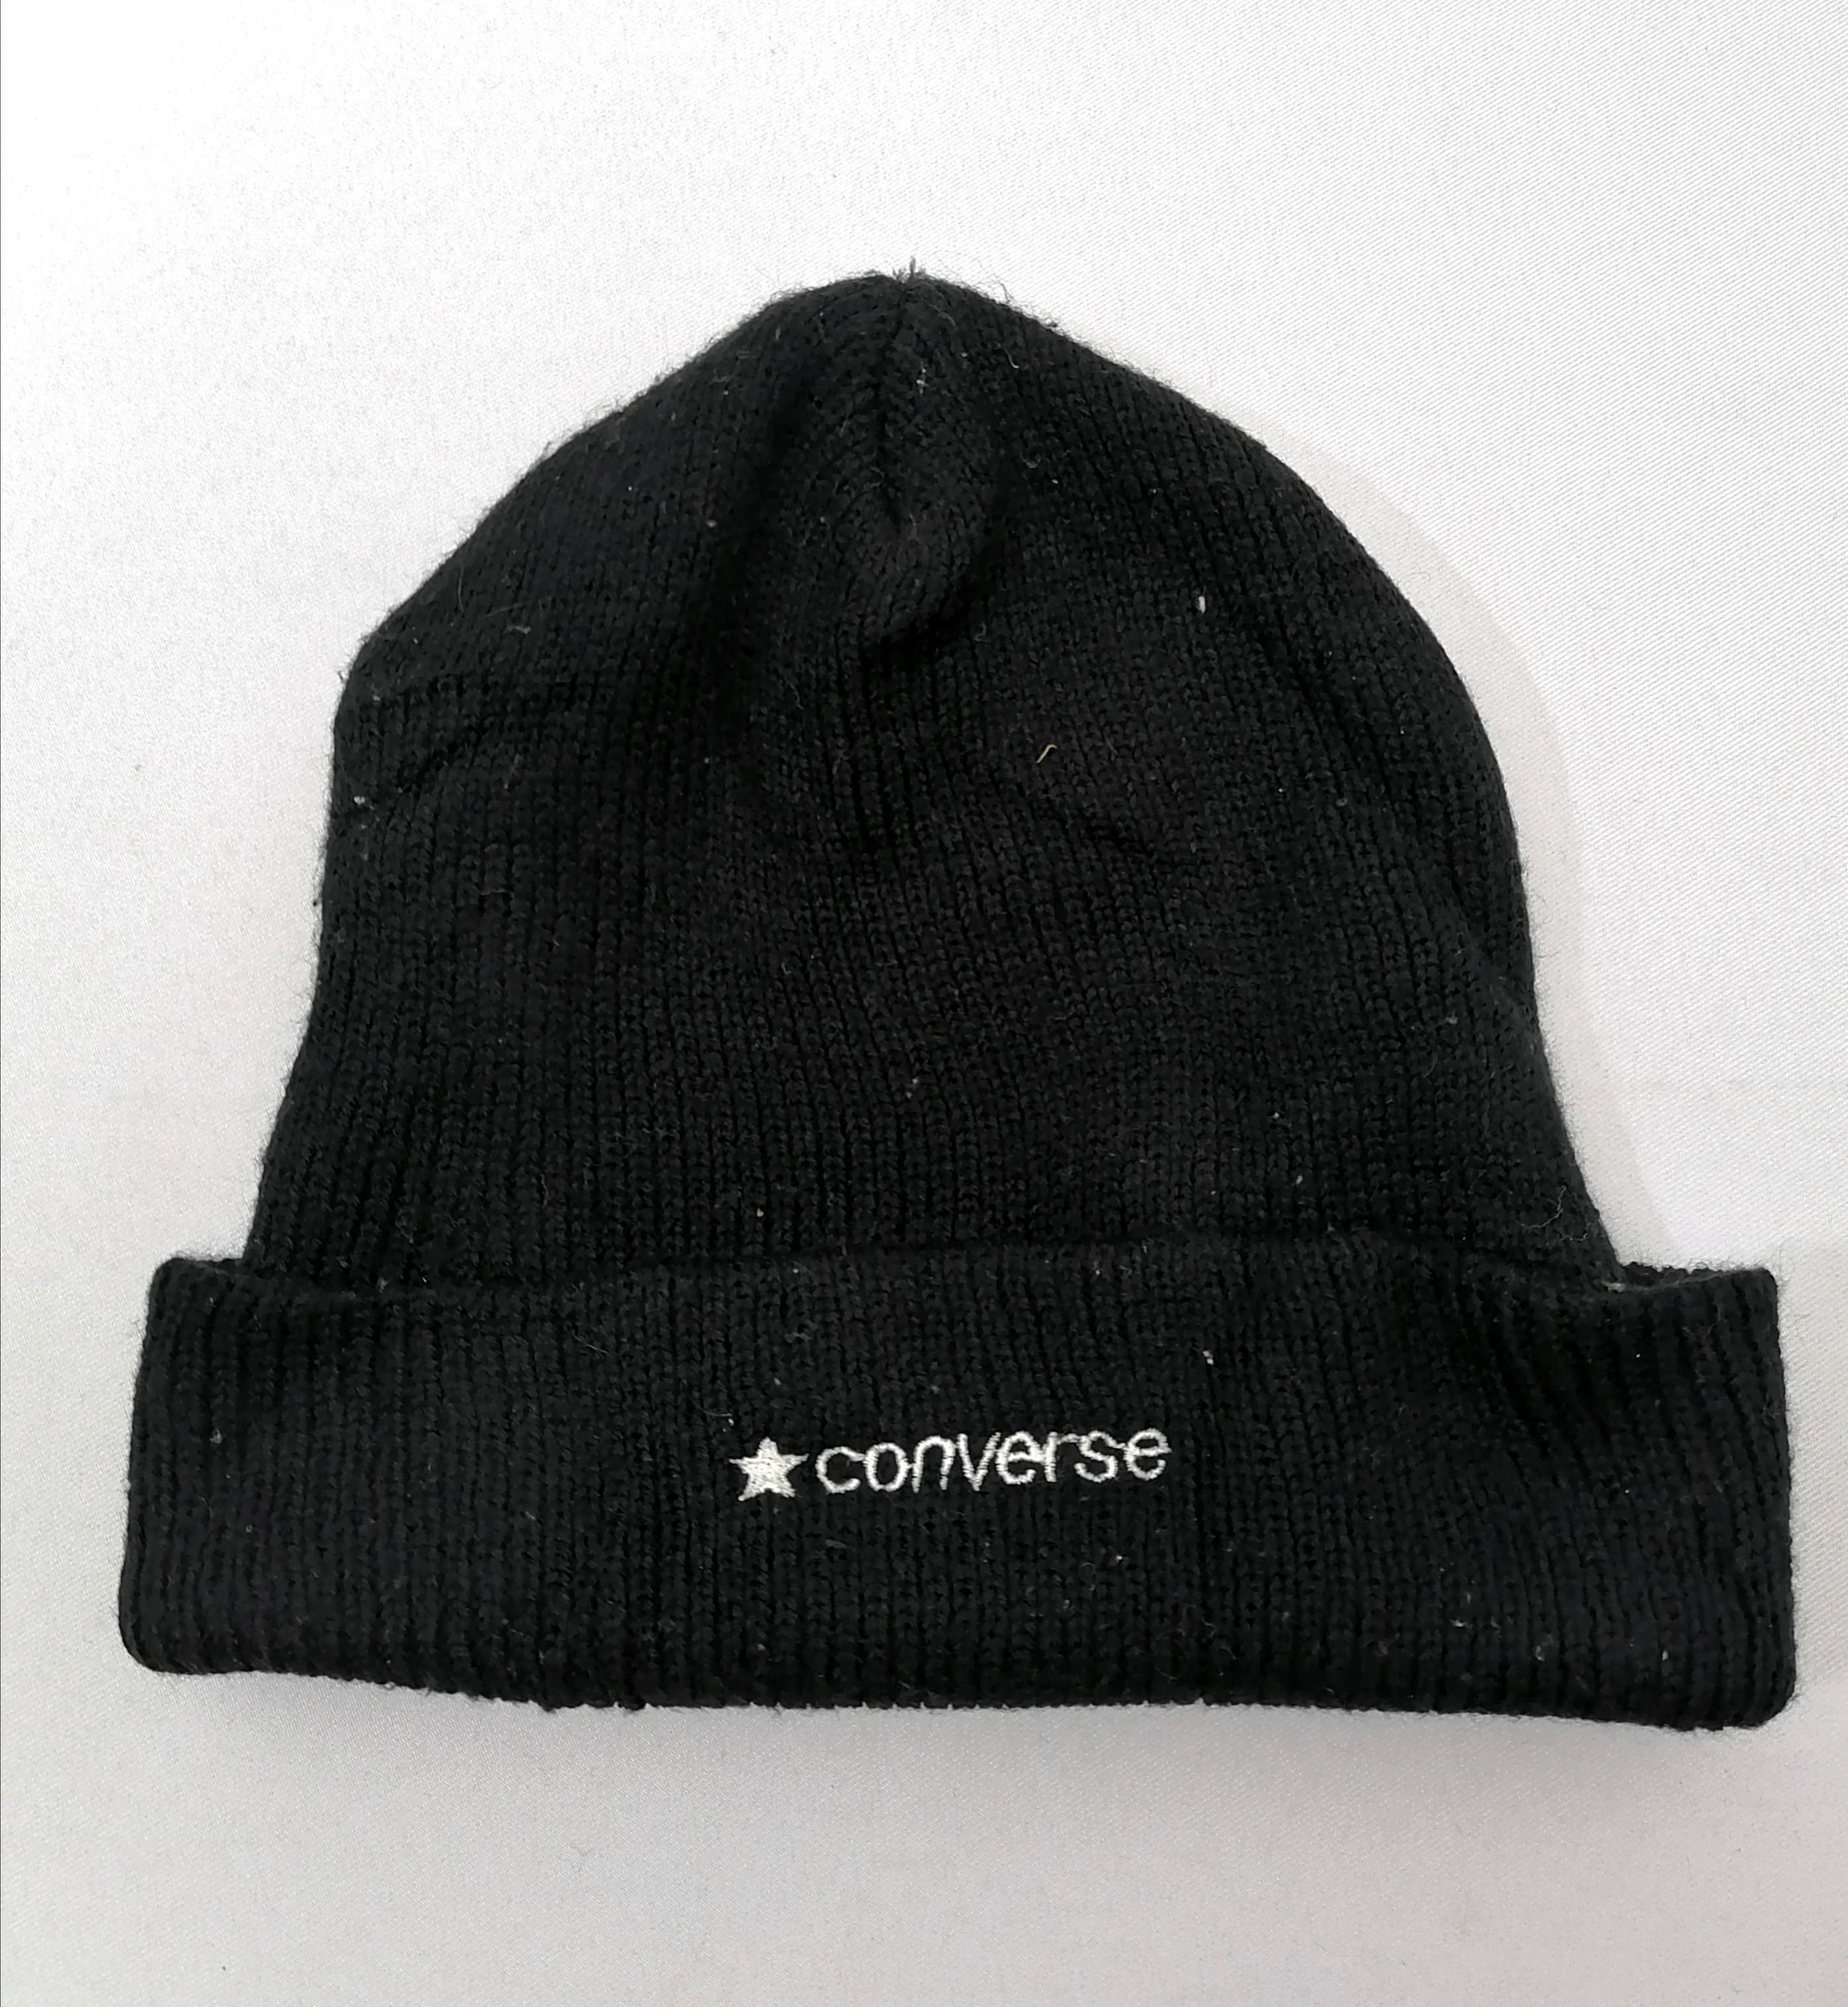 Vintage Converse Beanie Hat Size ONE SIZE - 2 Preview